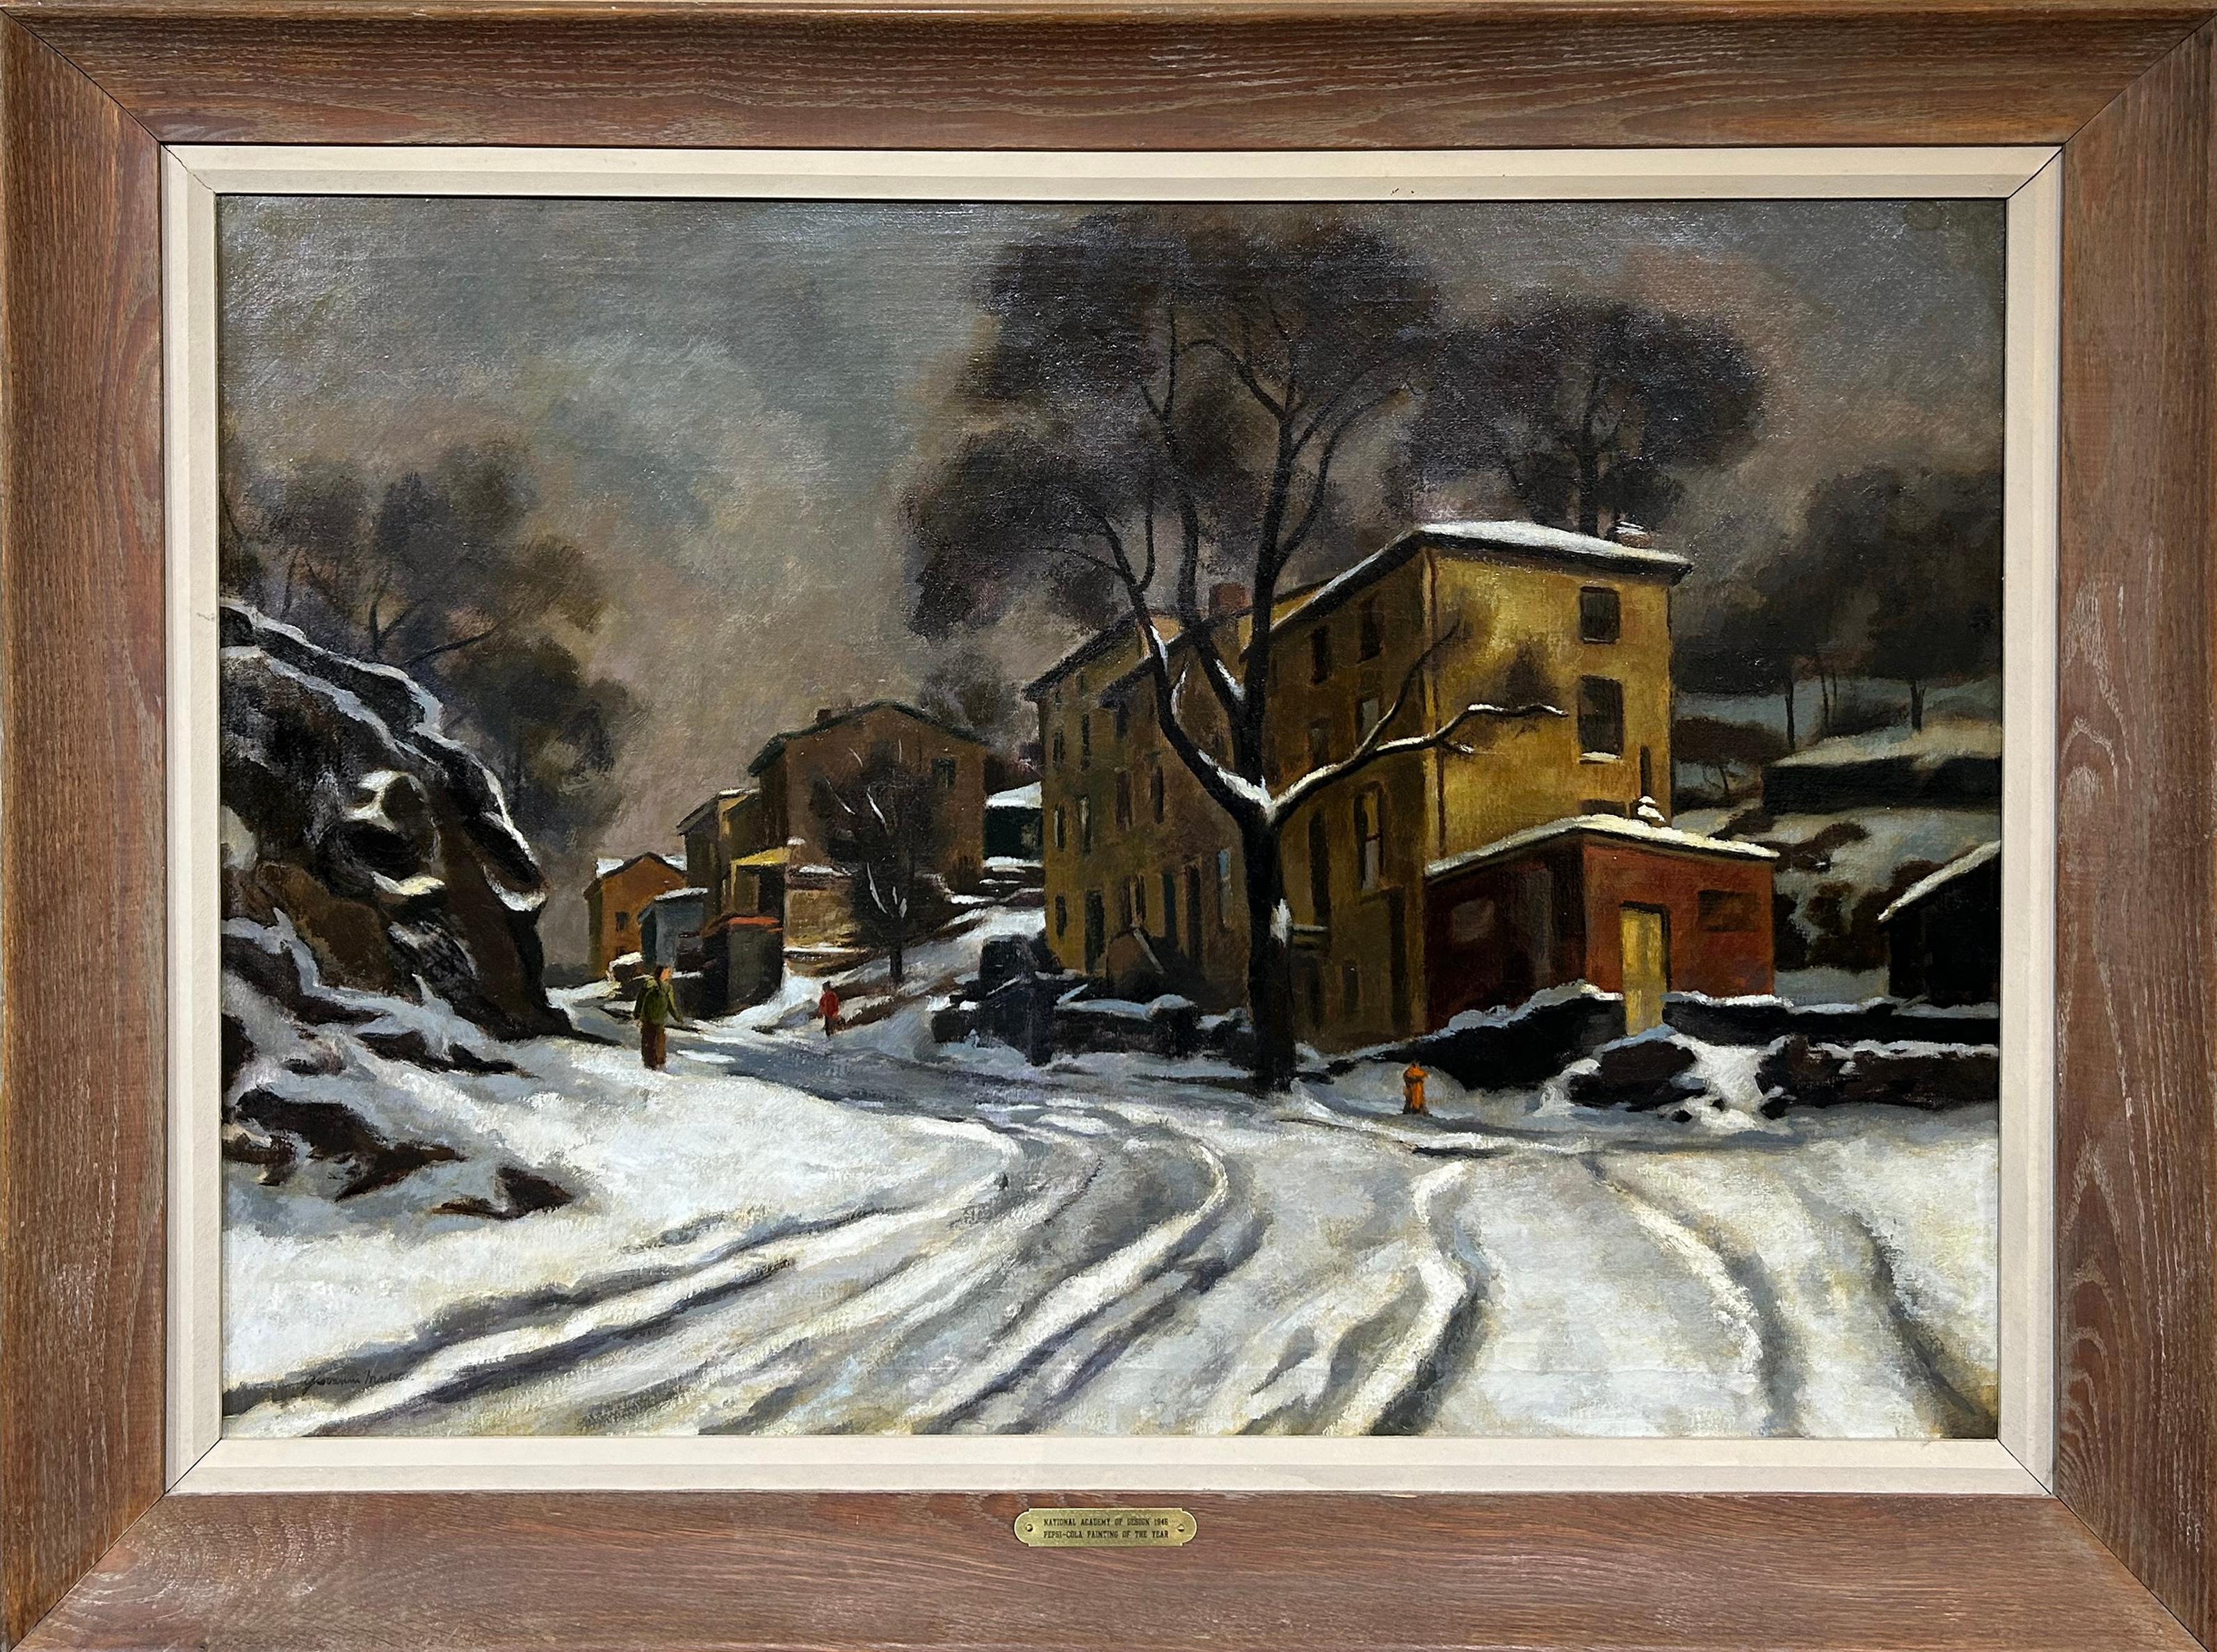 Winter in Manayunk, Regional American Cityscape by Pennsylvania Impressionist - Painting by Giovanni Martino